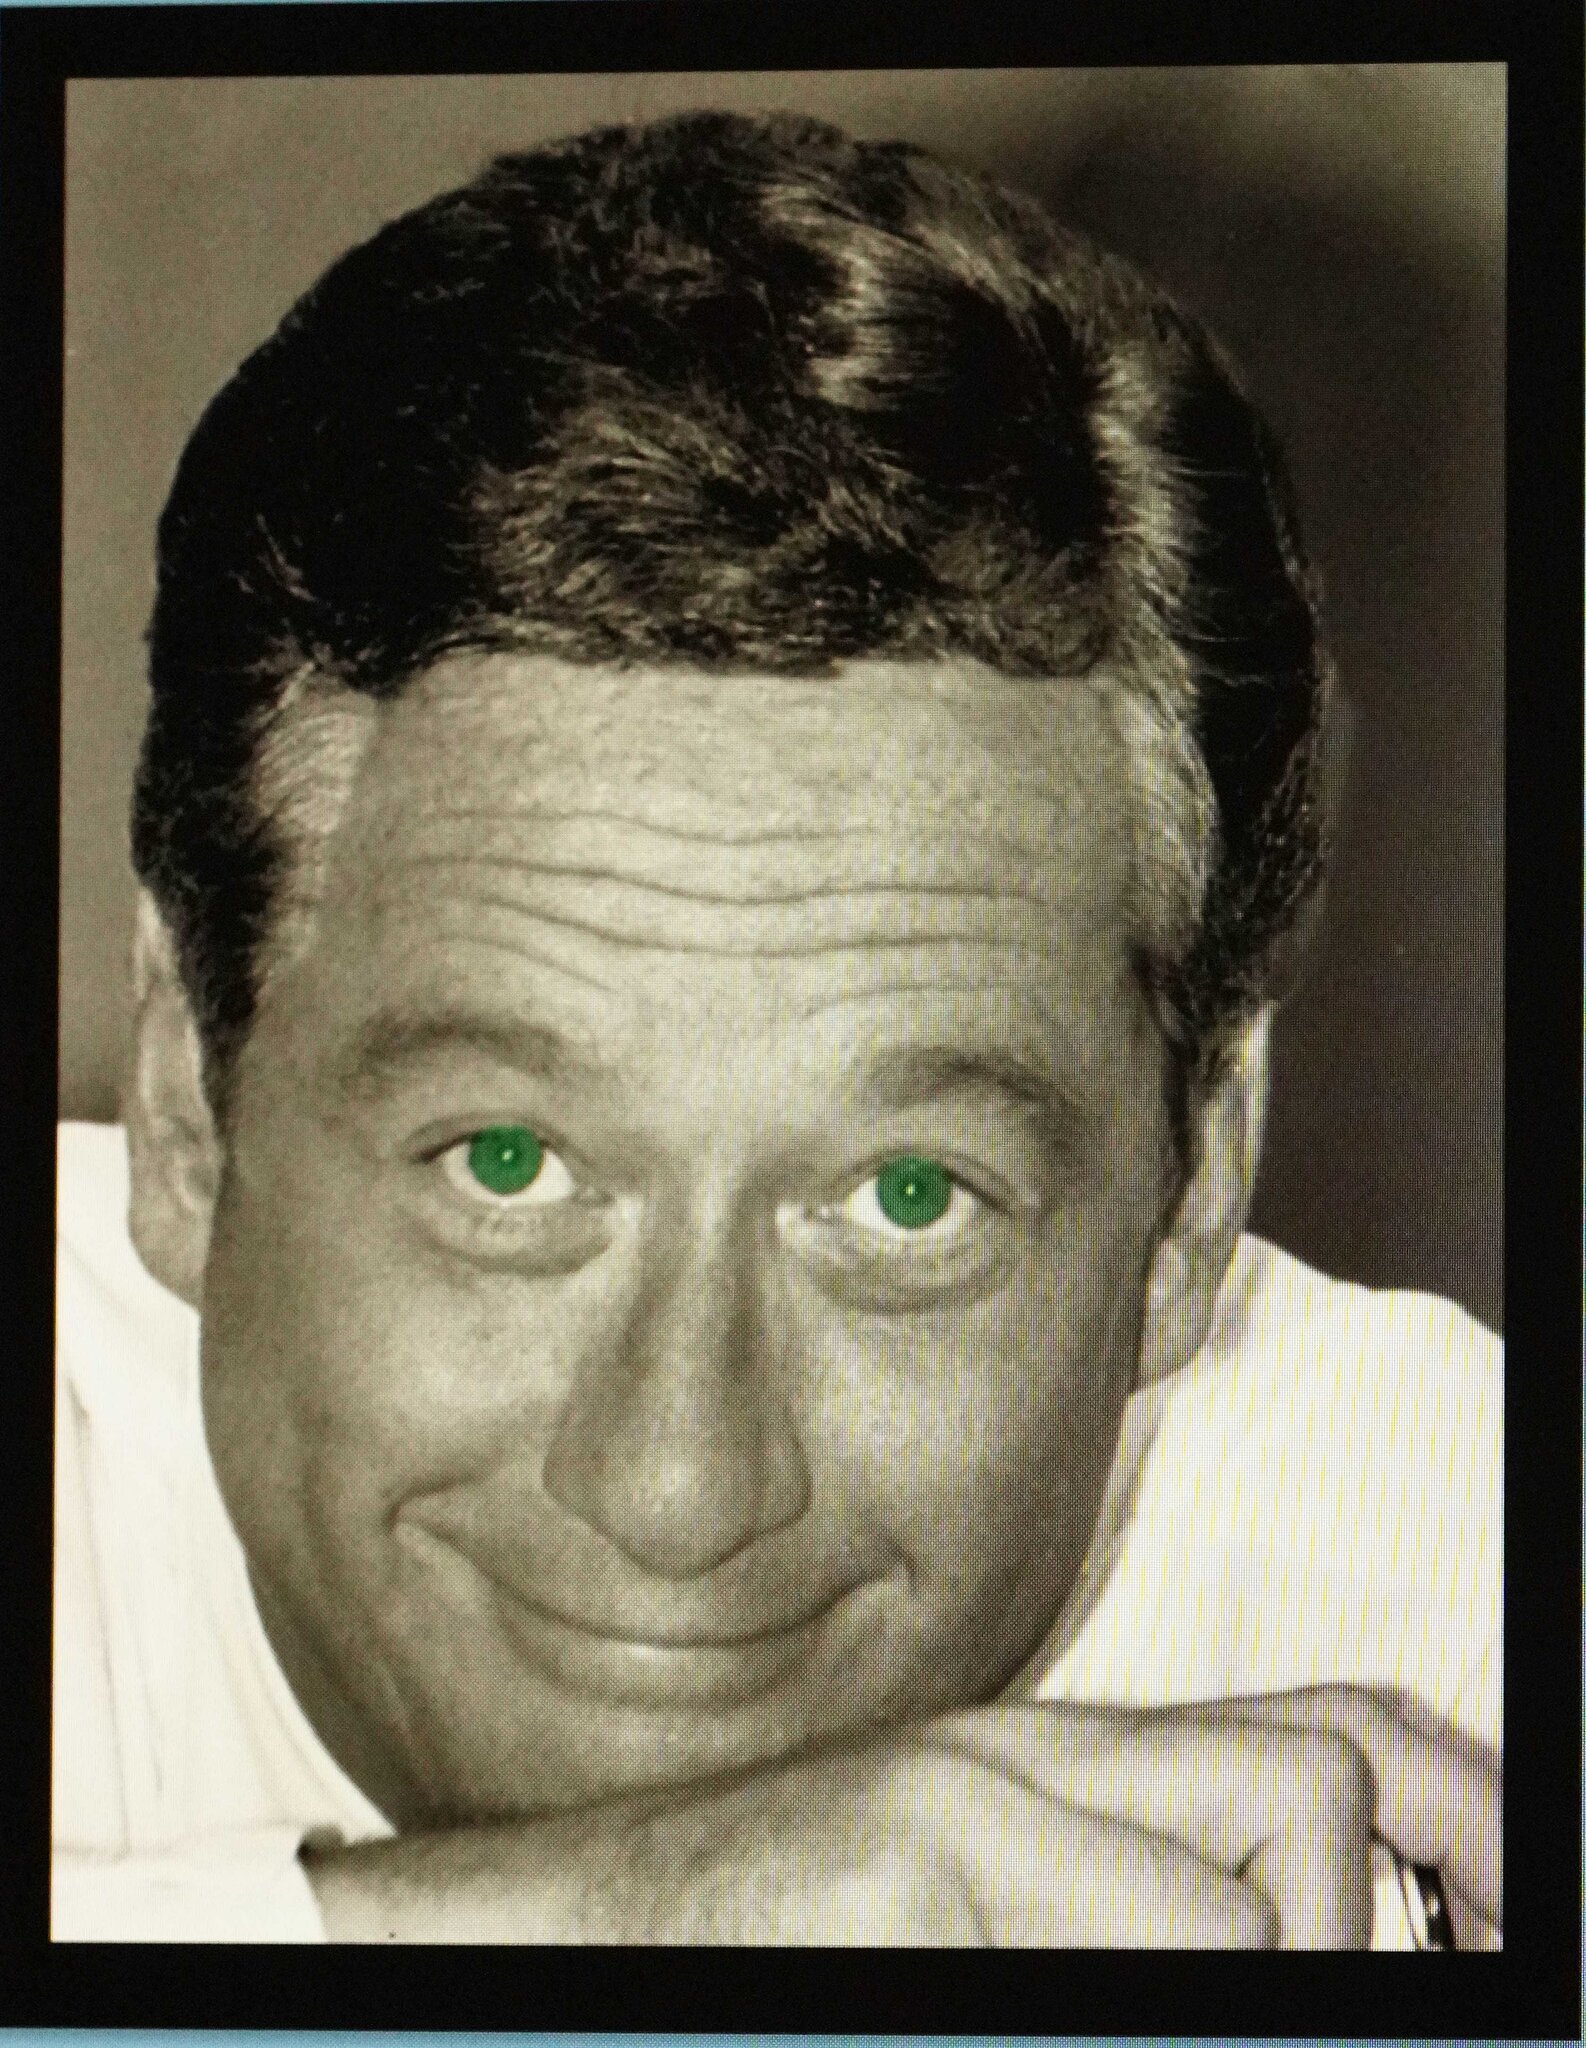 DONNIE WITH THE GREEN EYES.jpg